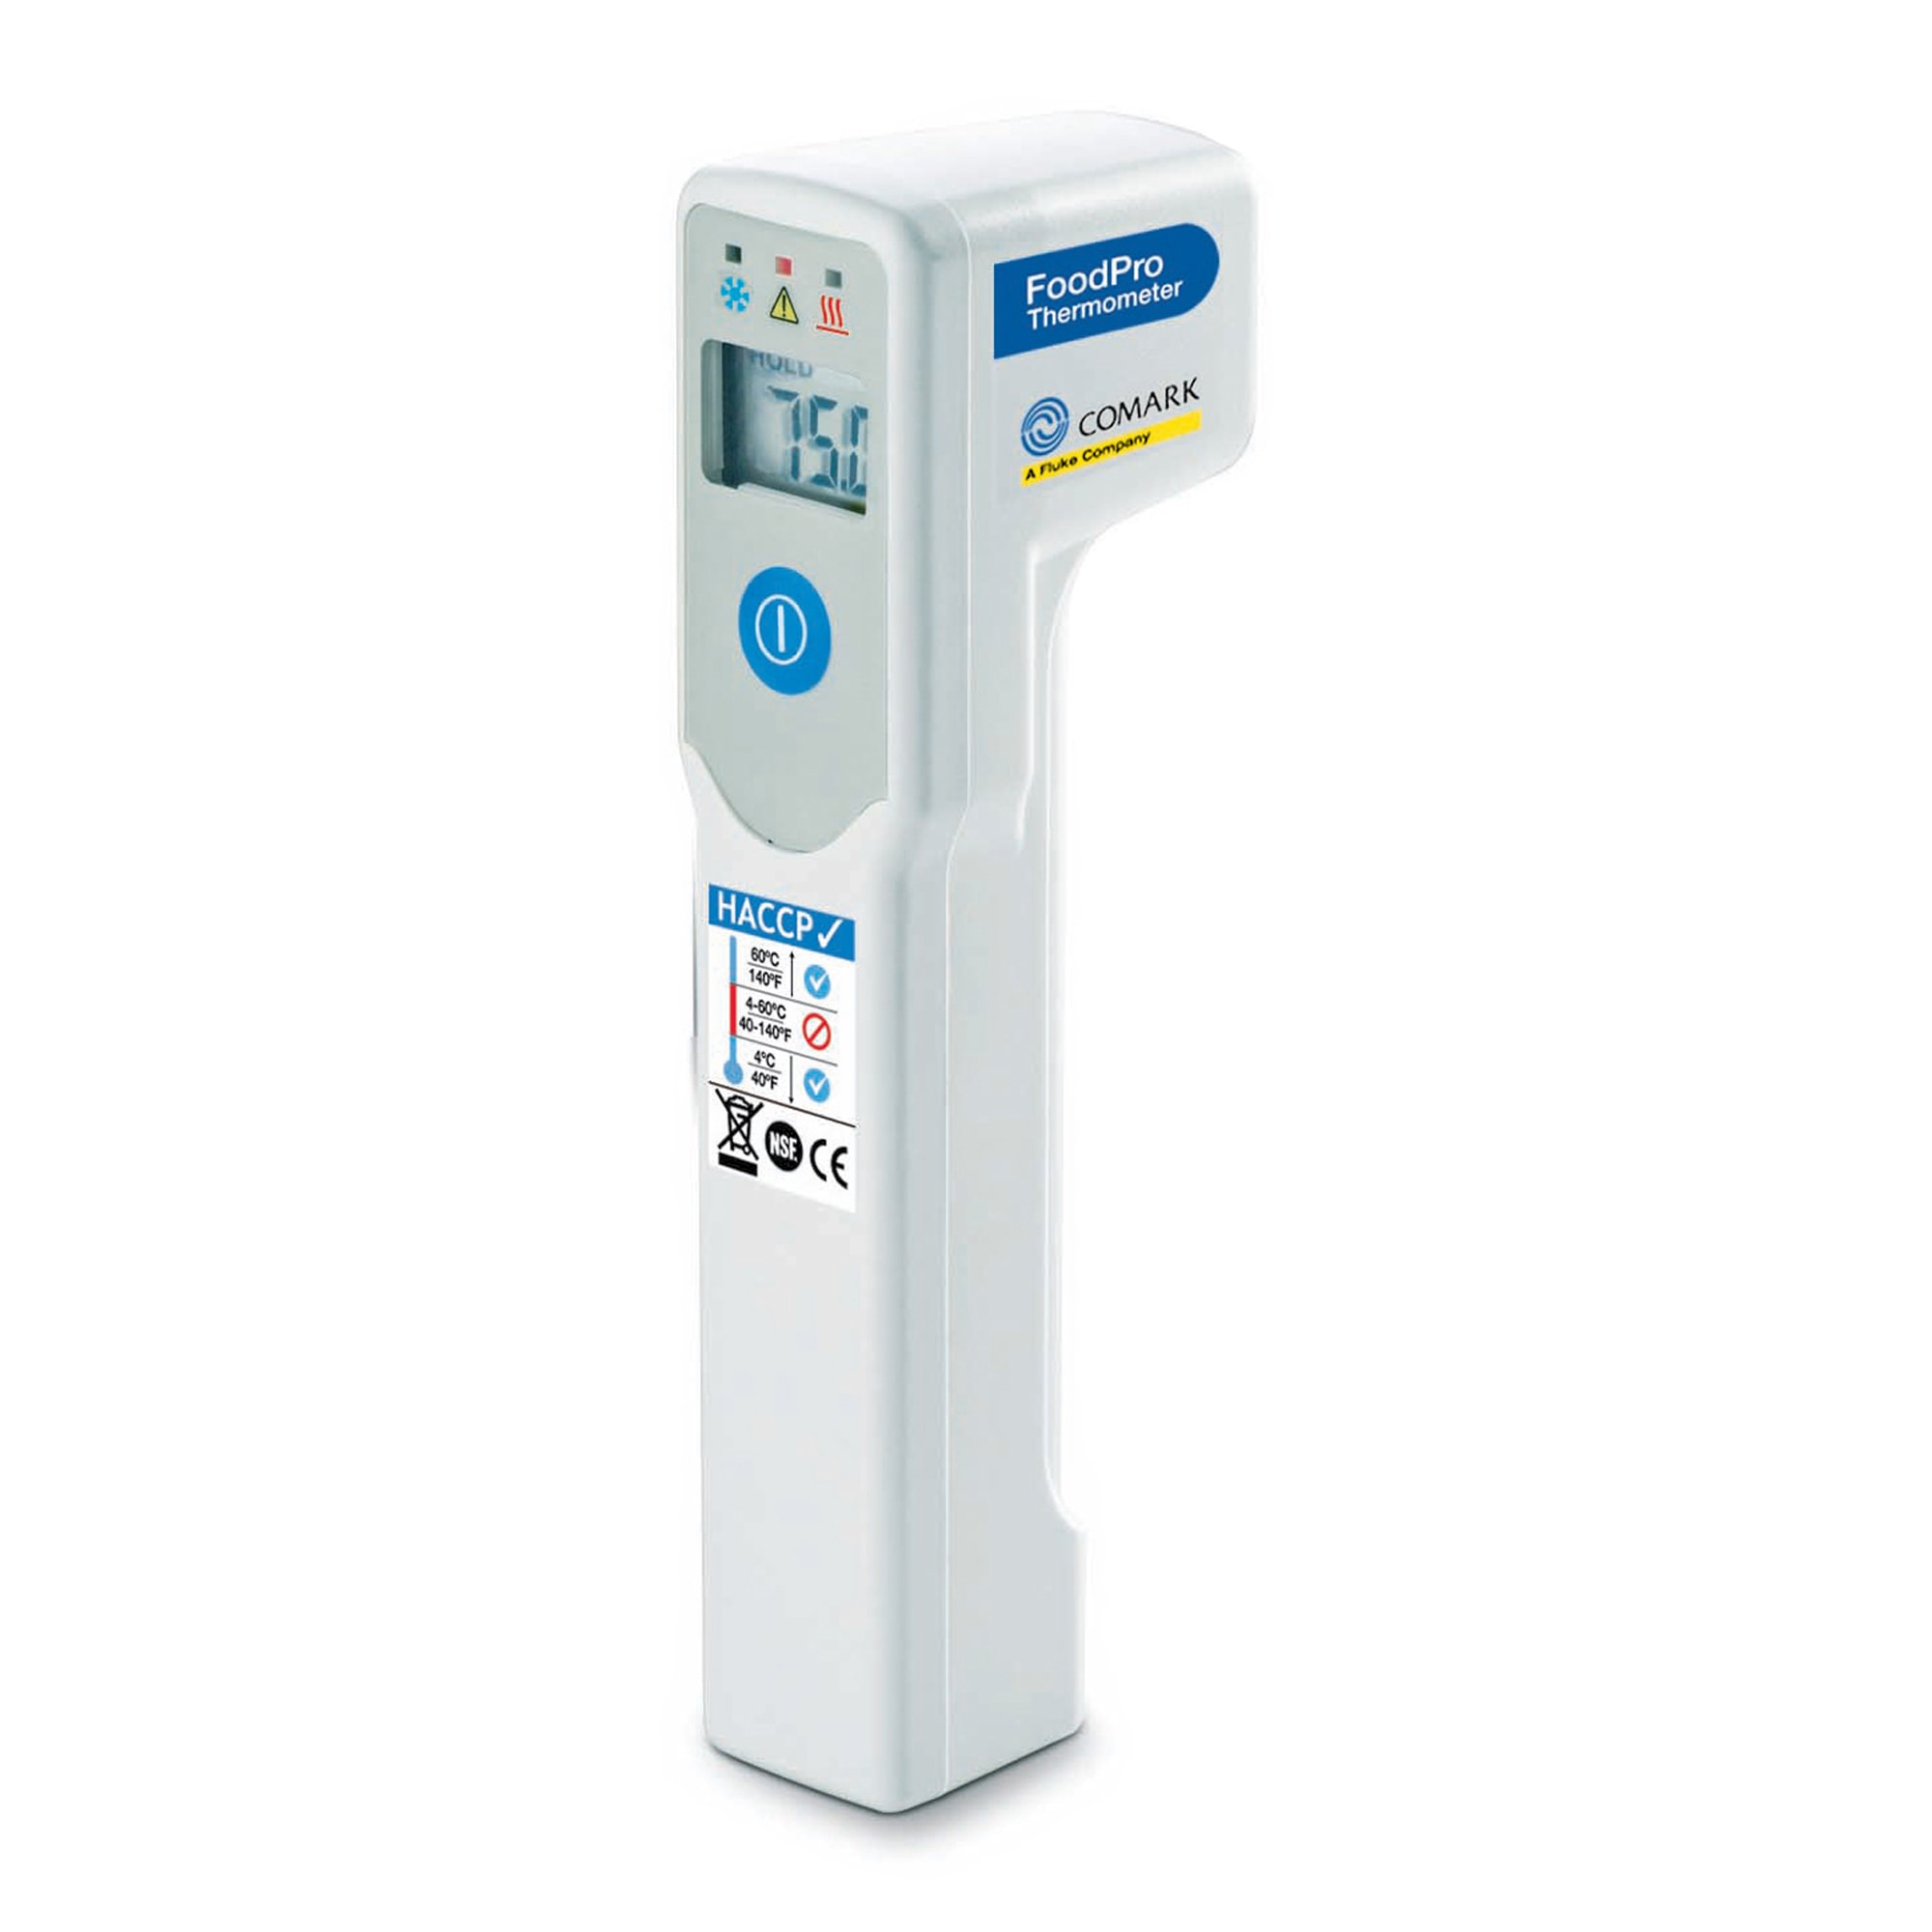 FP-CMARK-US Food Pro Infrared Thermometer